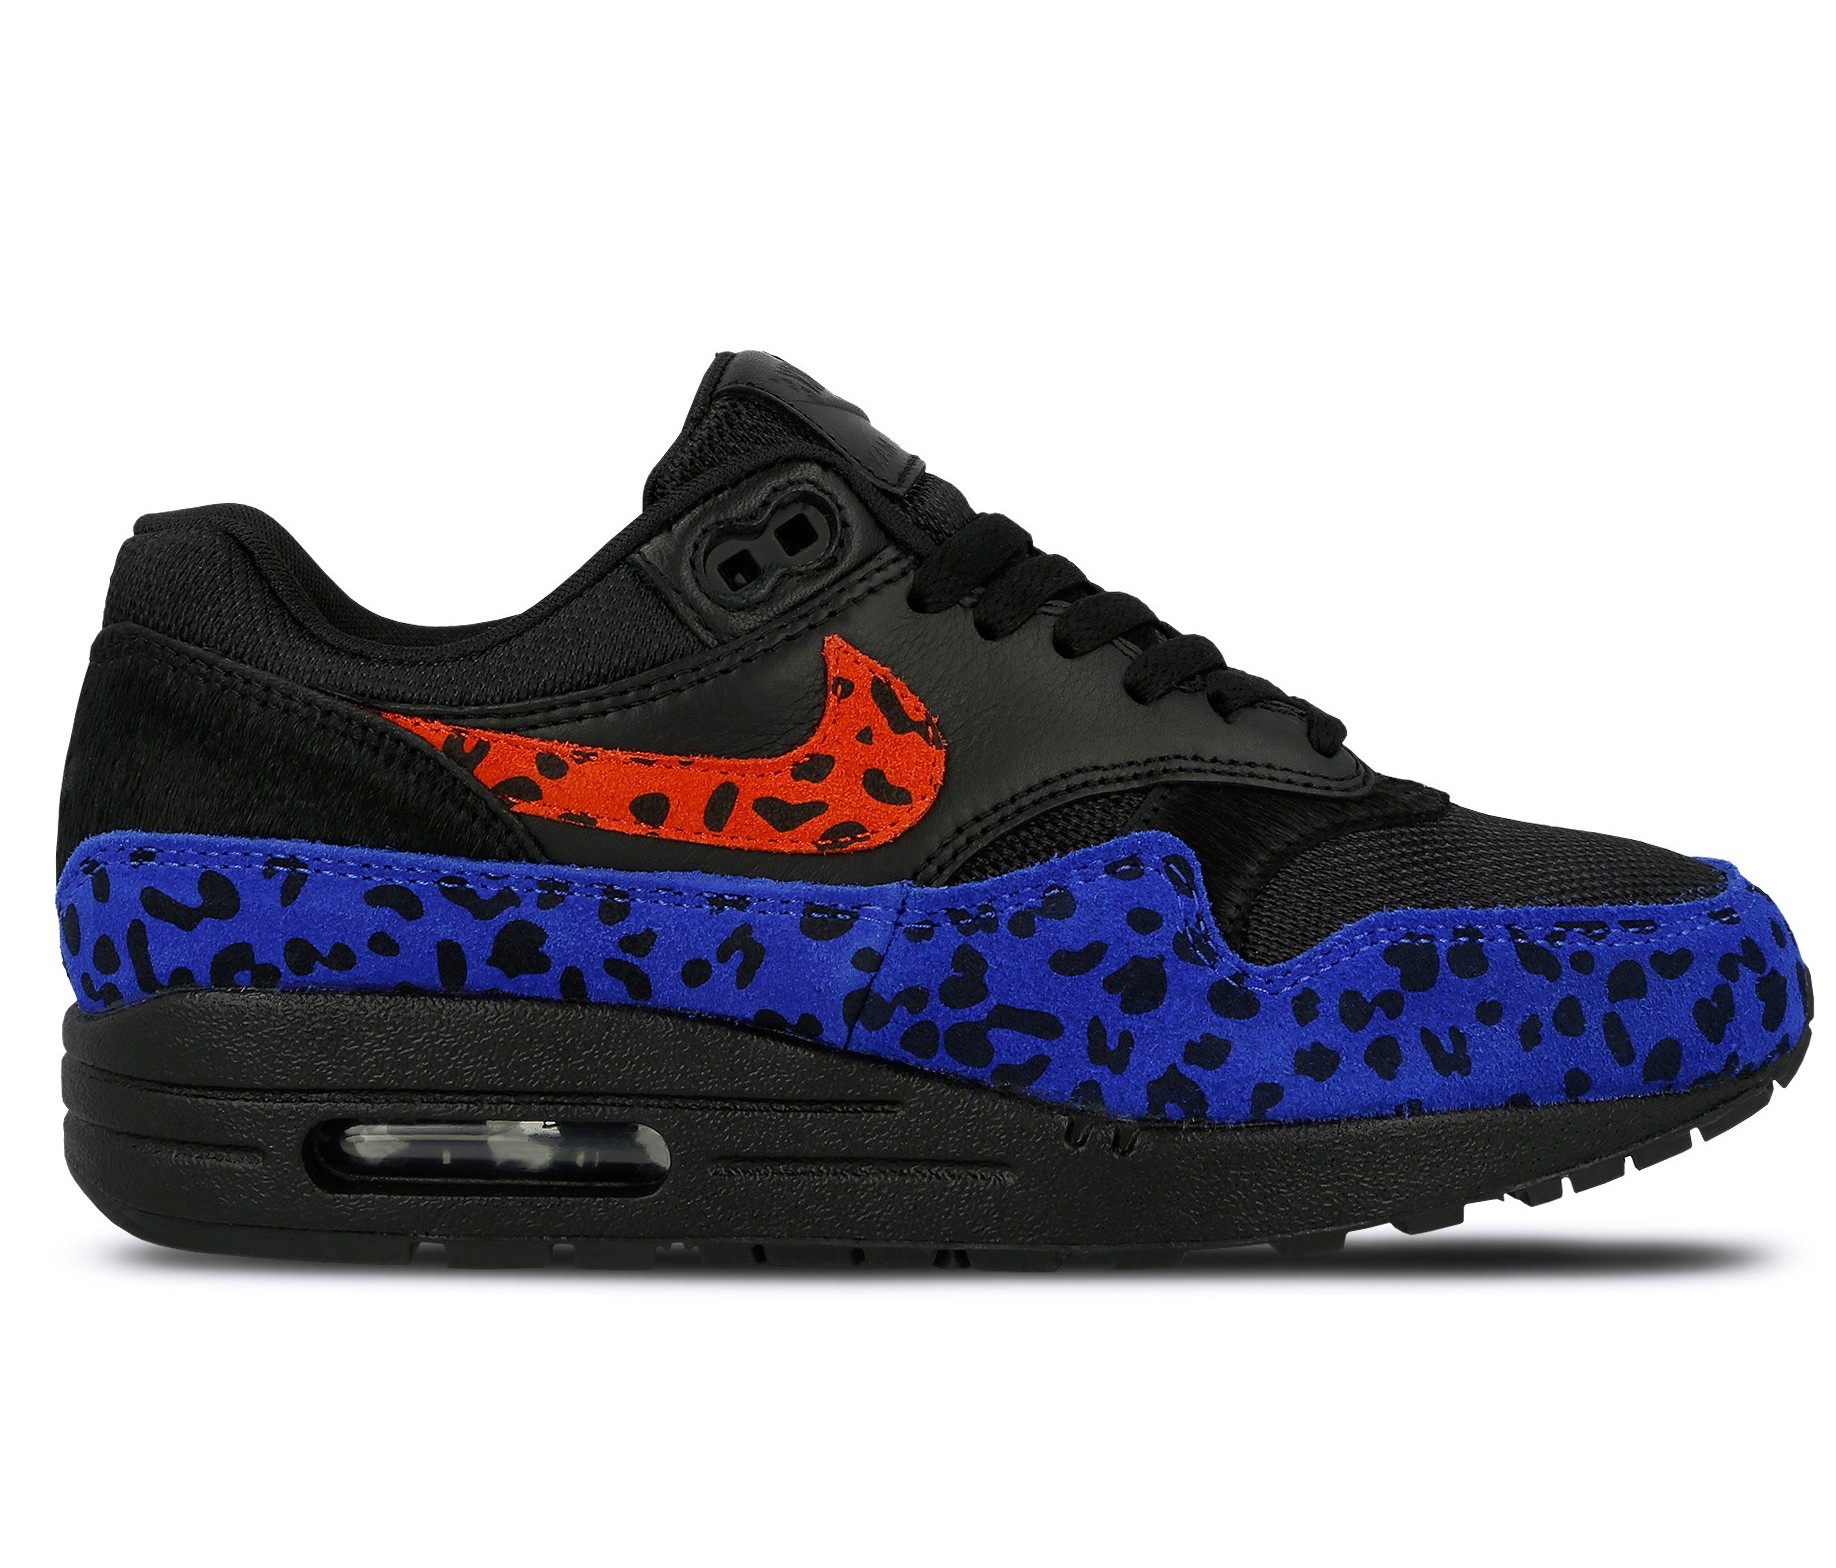 Now Available: Nike Air Max 1 Premium W 